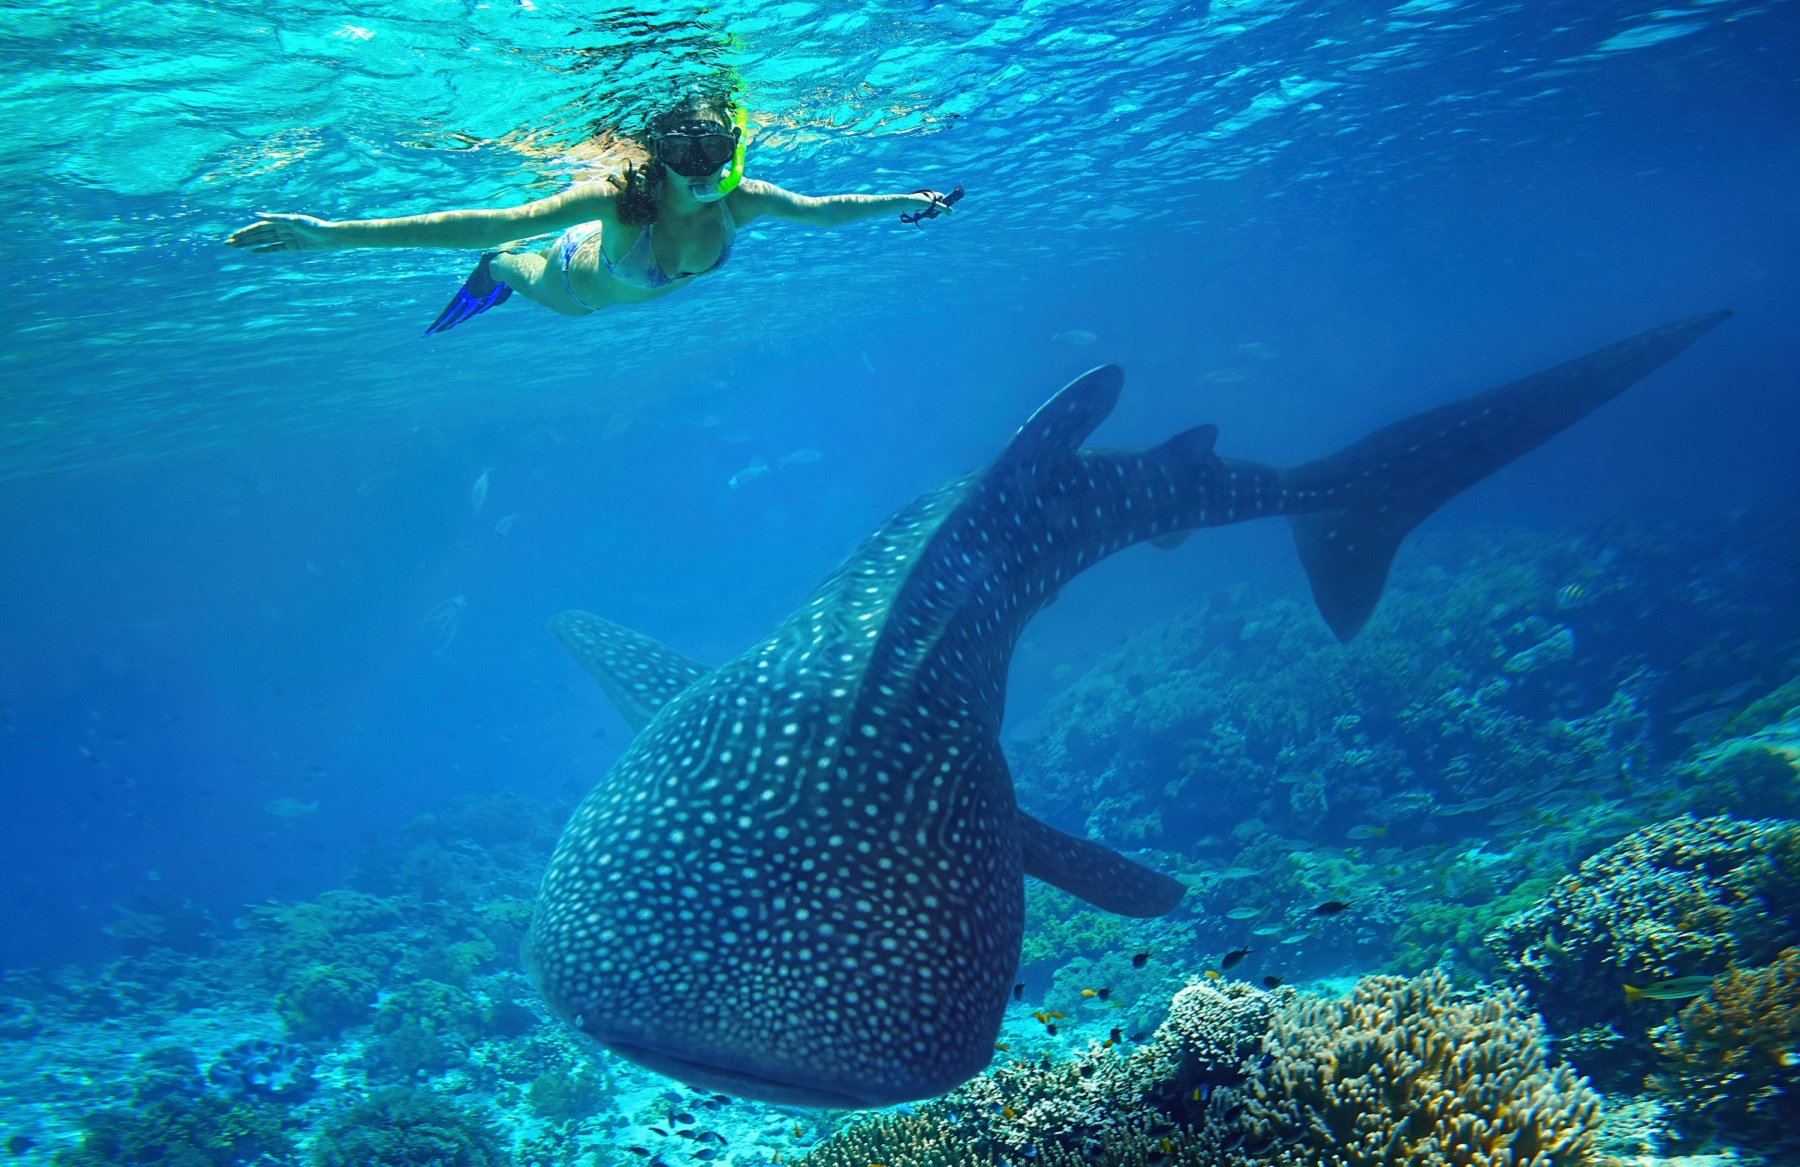 Swimming with whale sharks in Australia